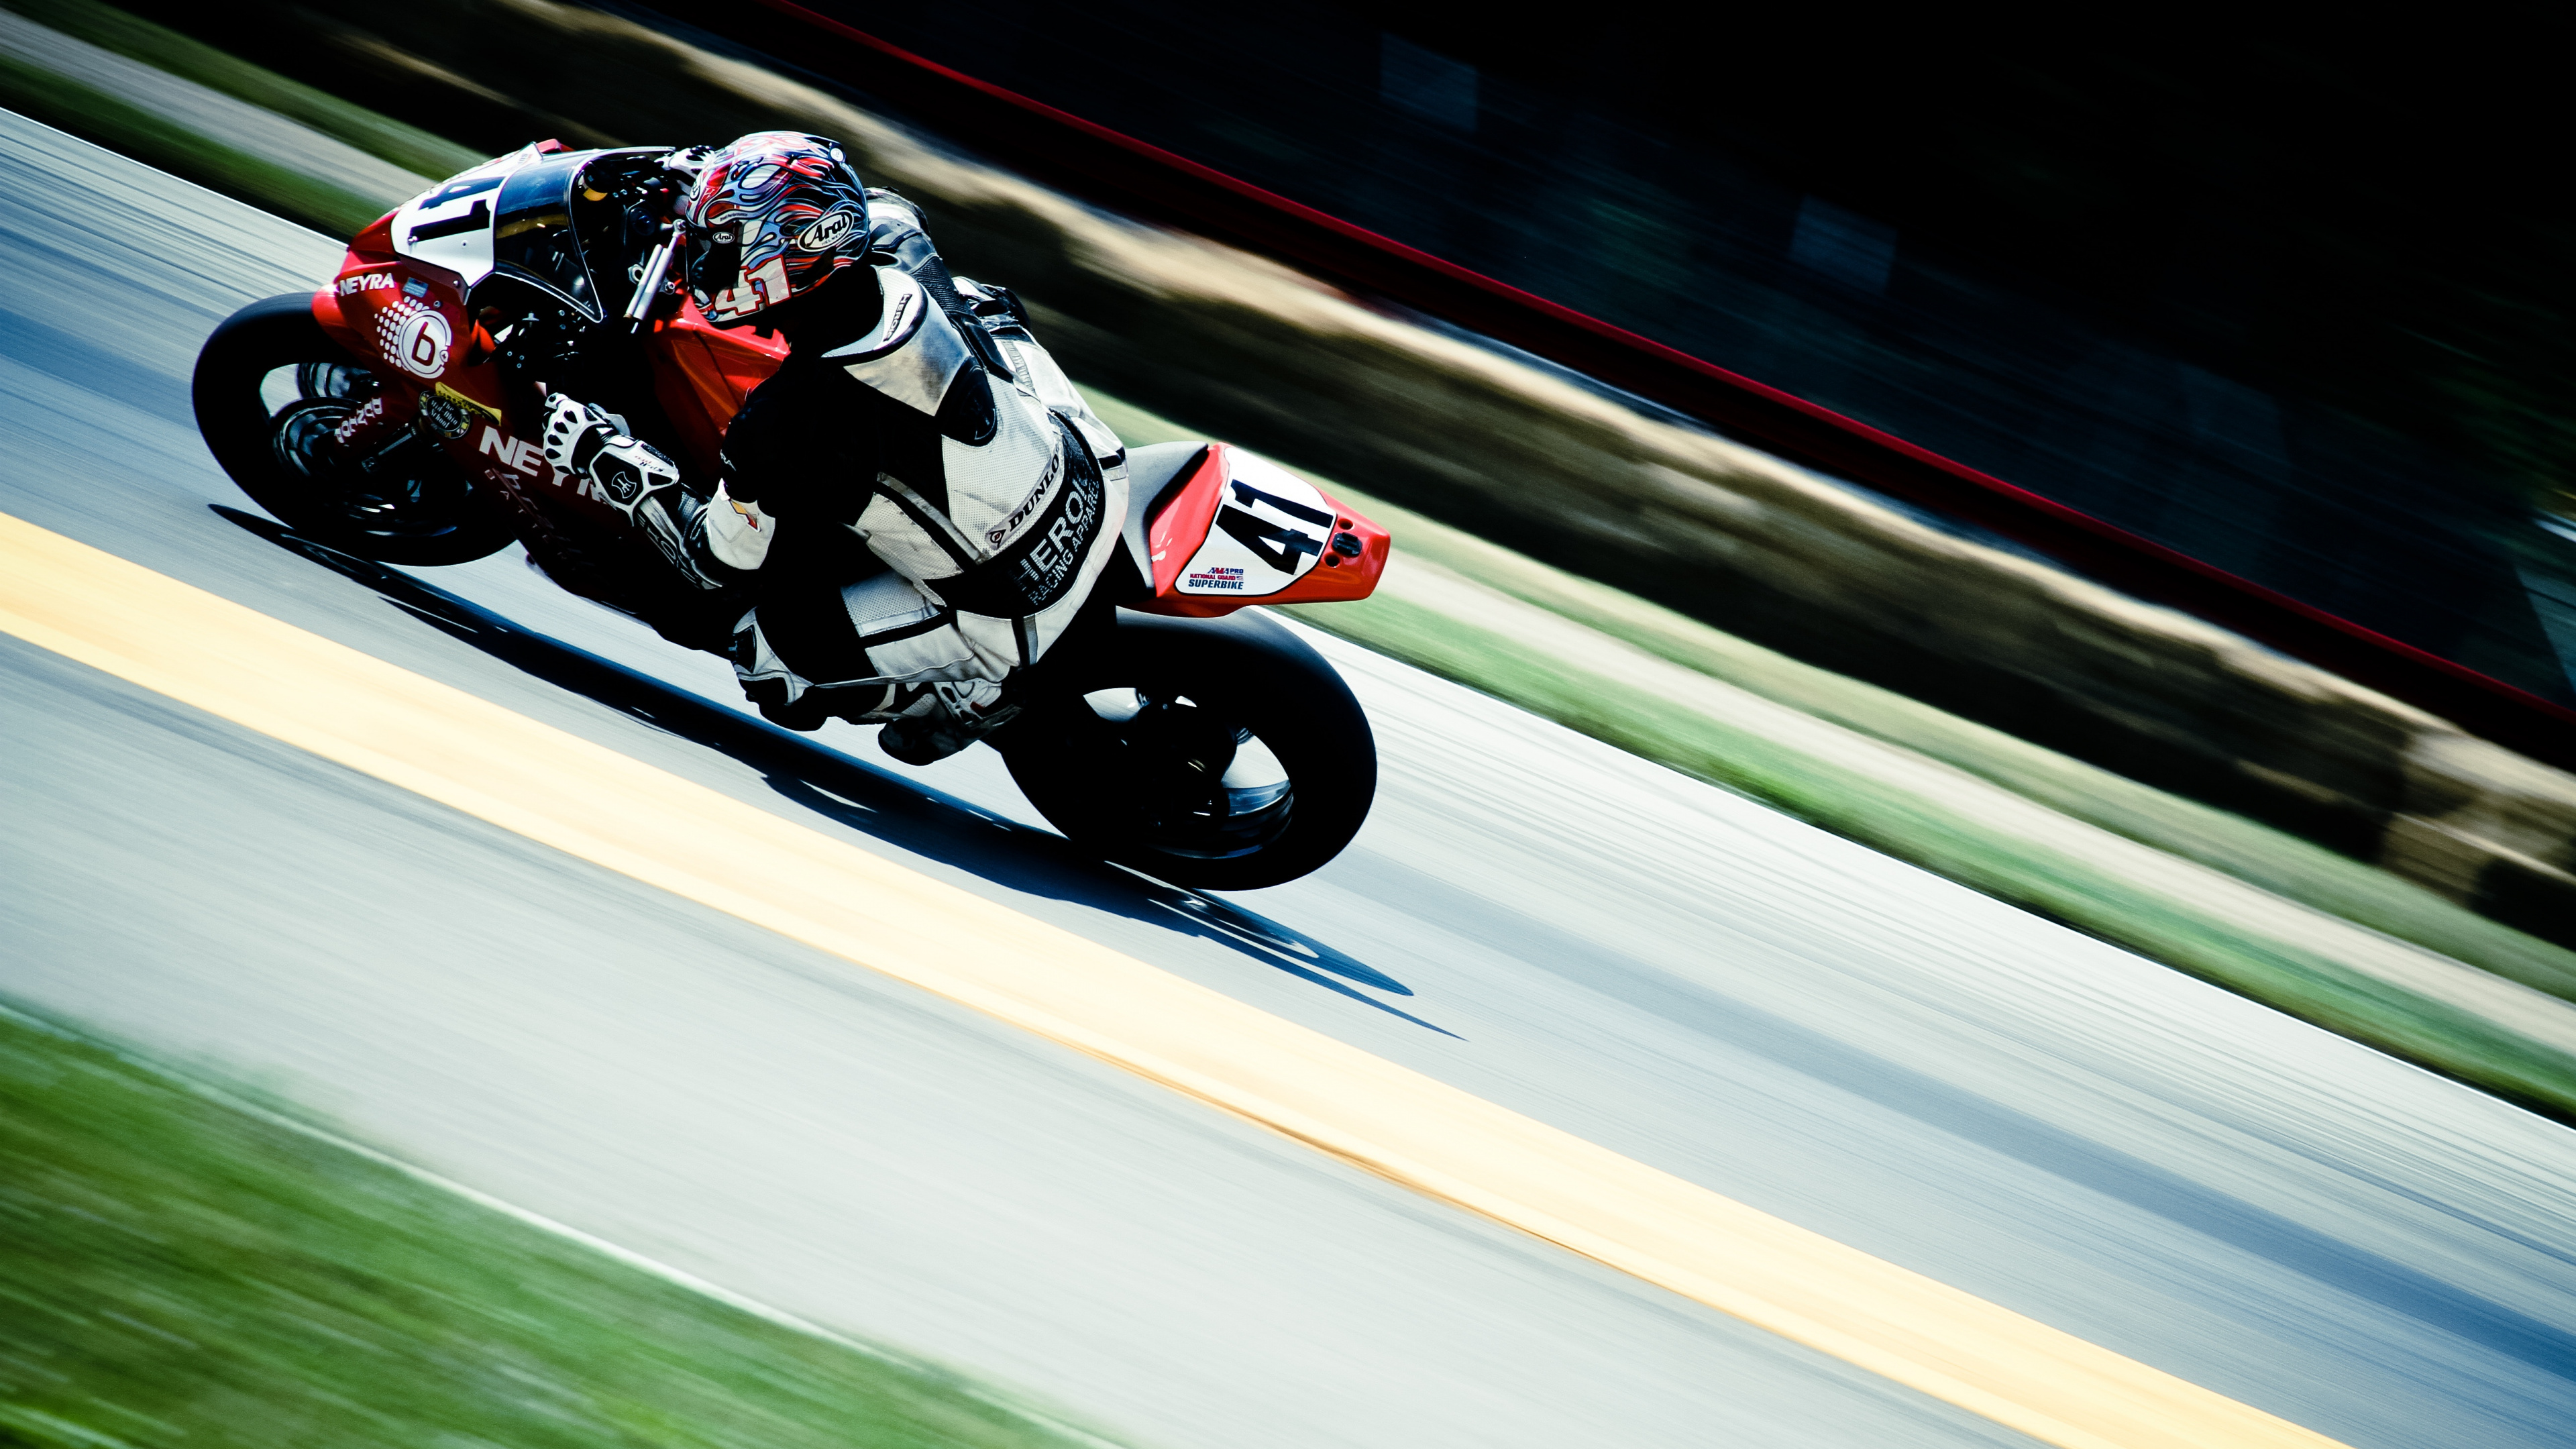 Man in Red and White Racing Suit Riding on Sports Bike. Wallpaper in 3840x2160 Resolution